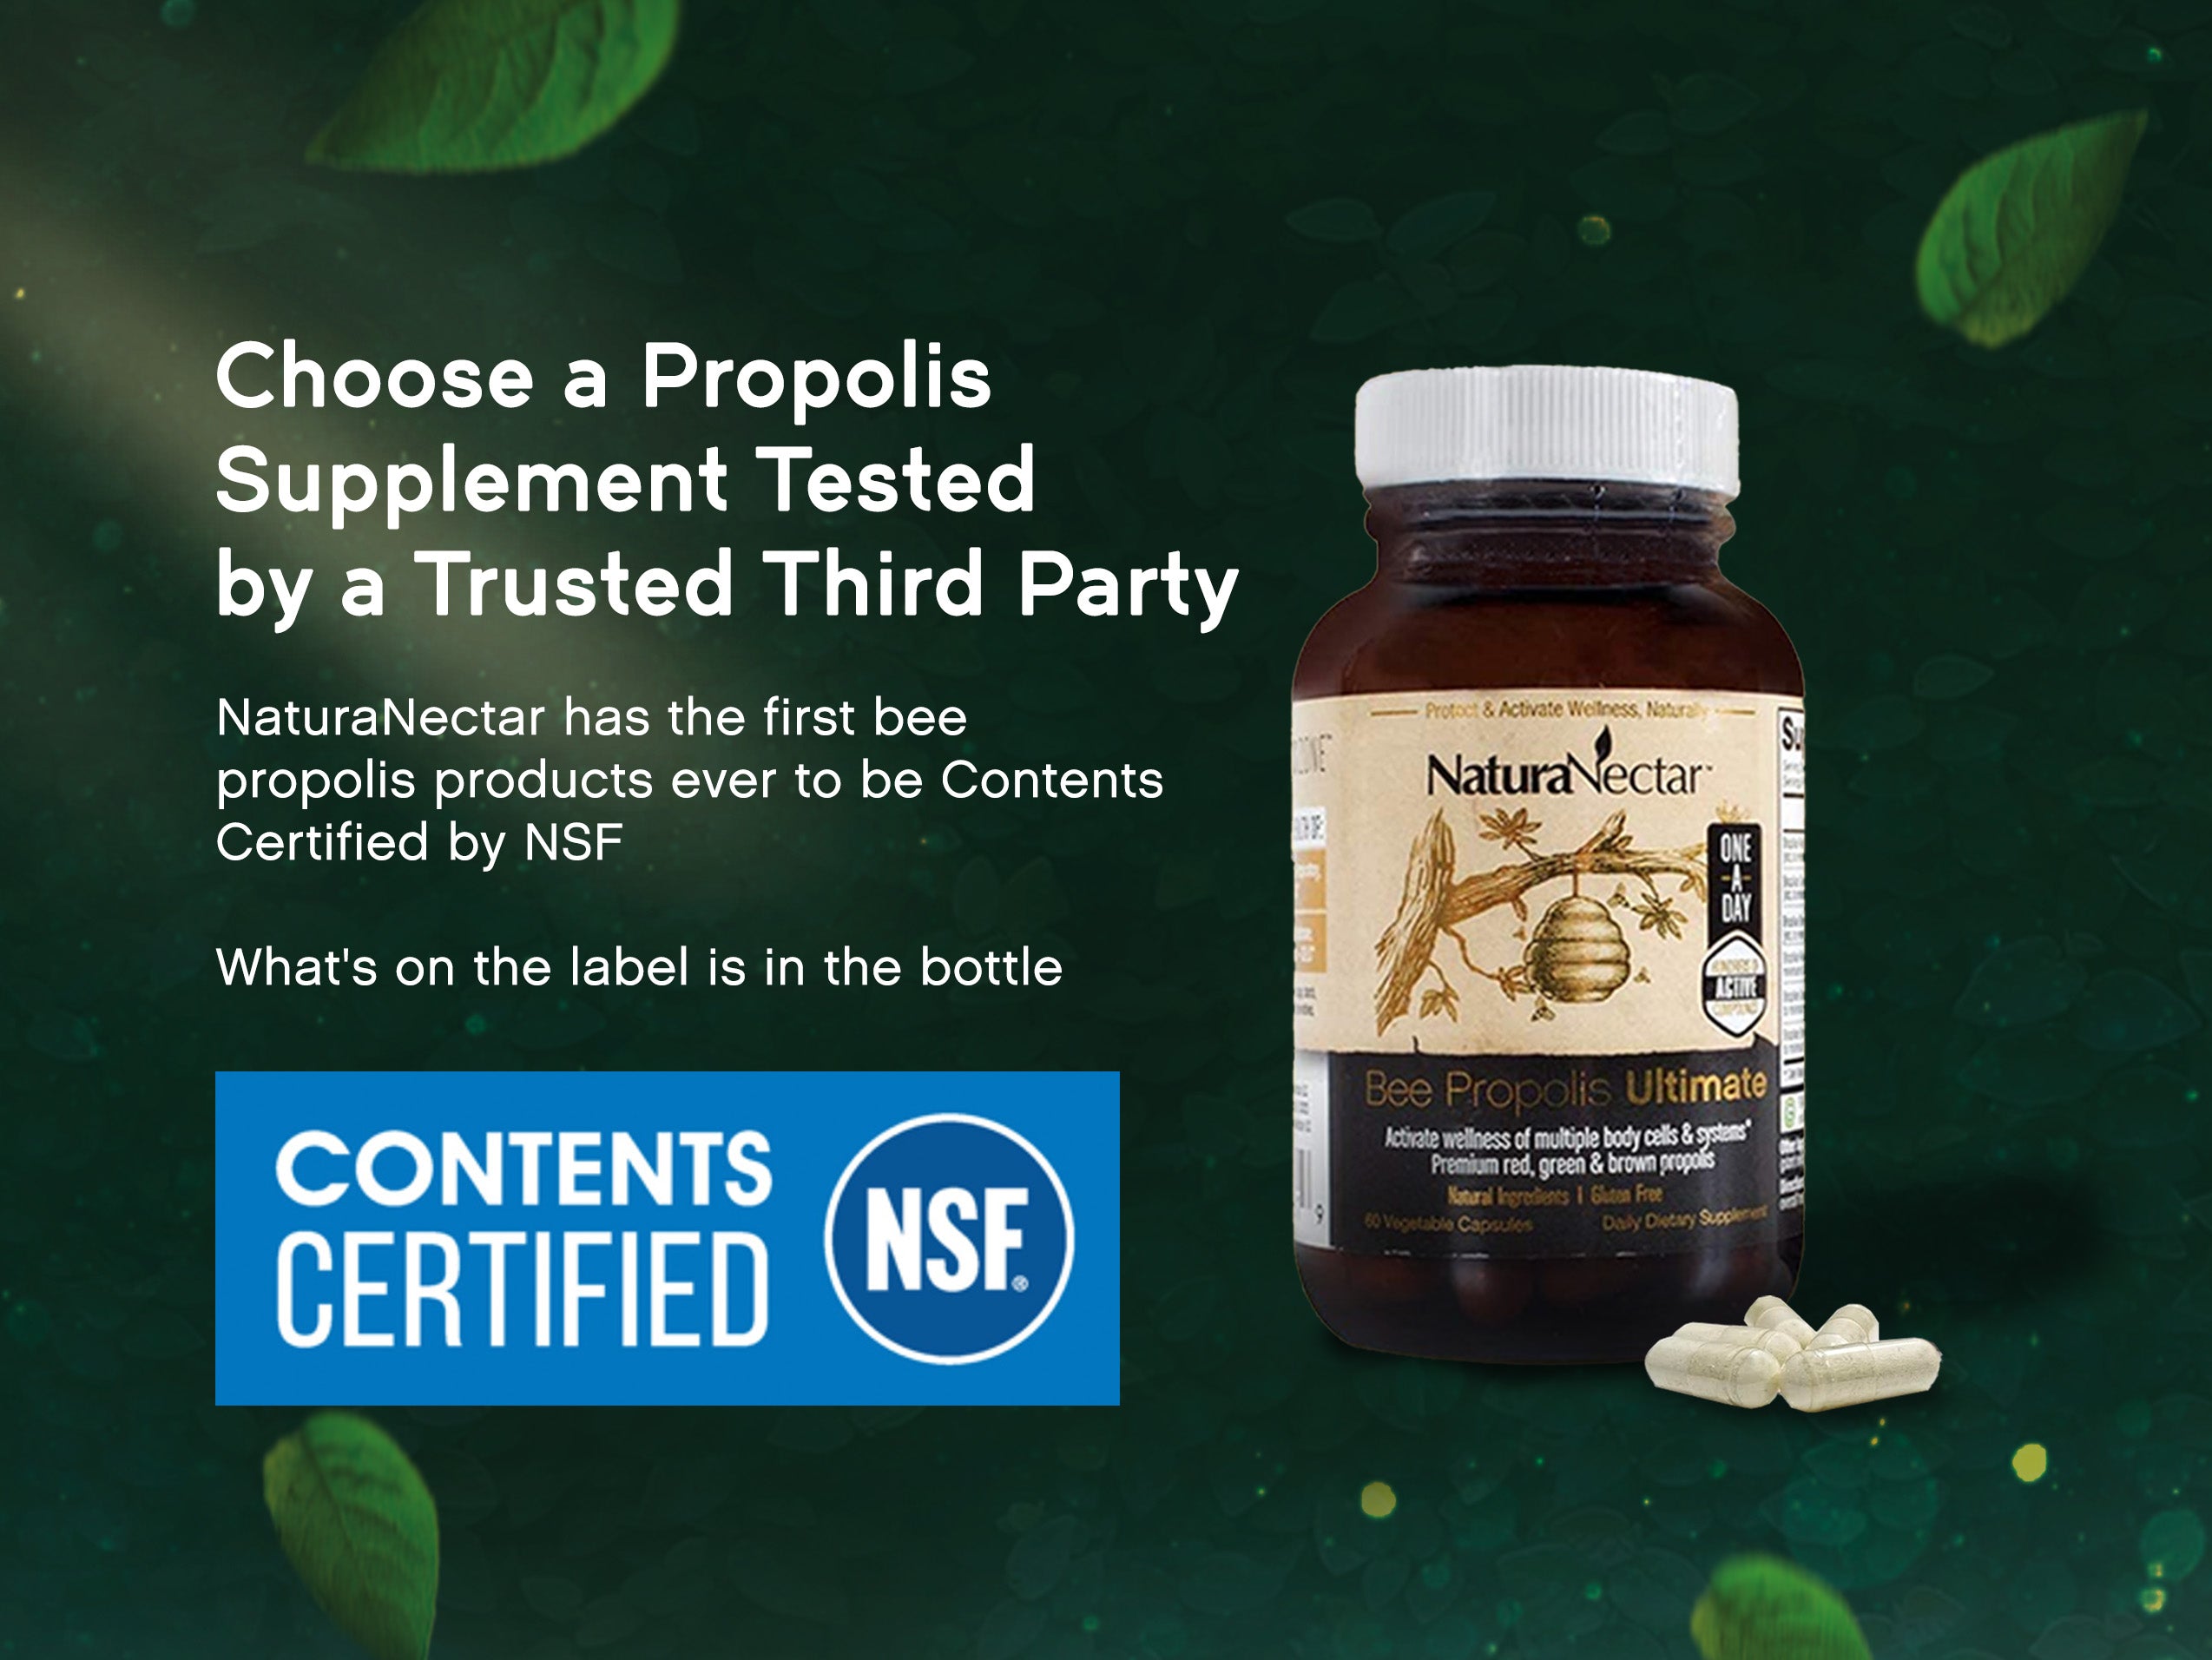 Bee Propolis Ultimate - Blanket your body’s cells and systems with more than 20mg/dose of the most complete & standardized health-promoting propolis compounds